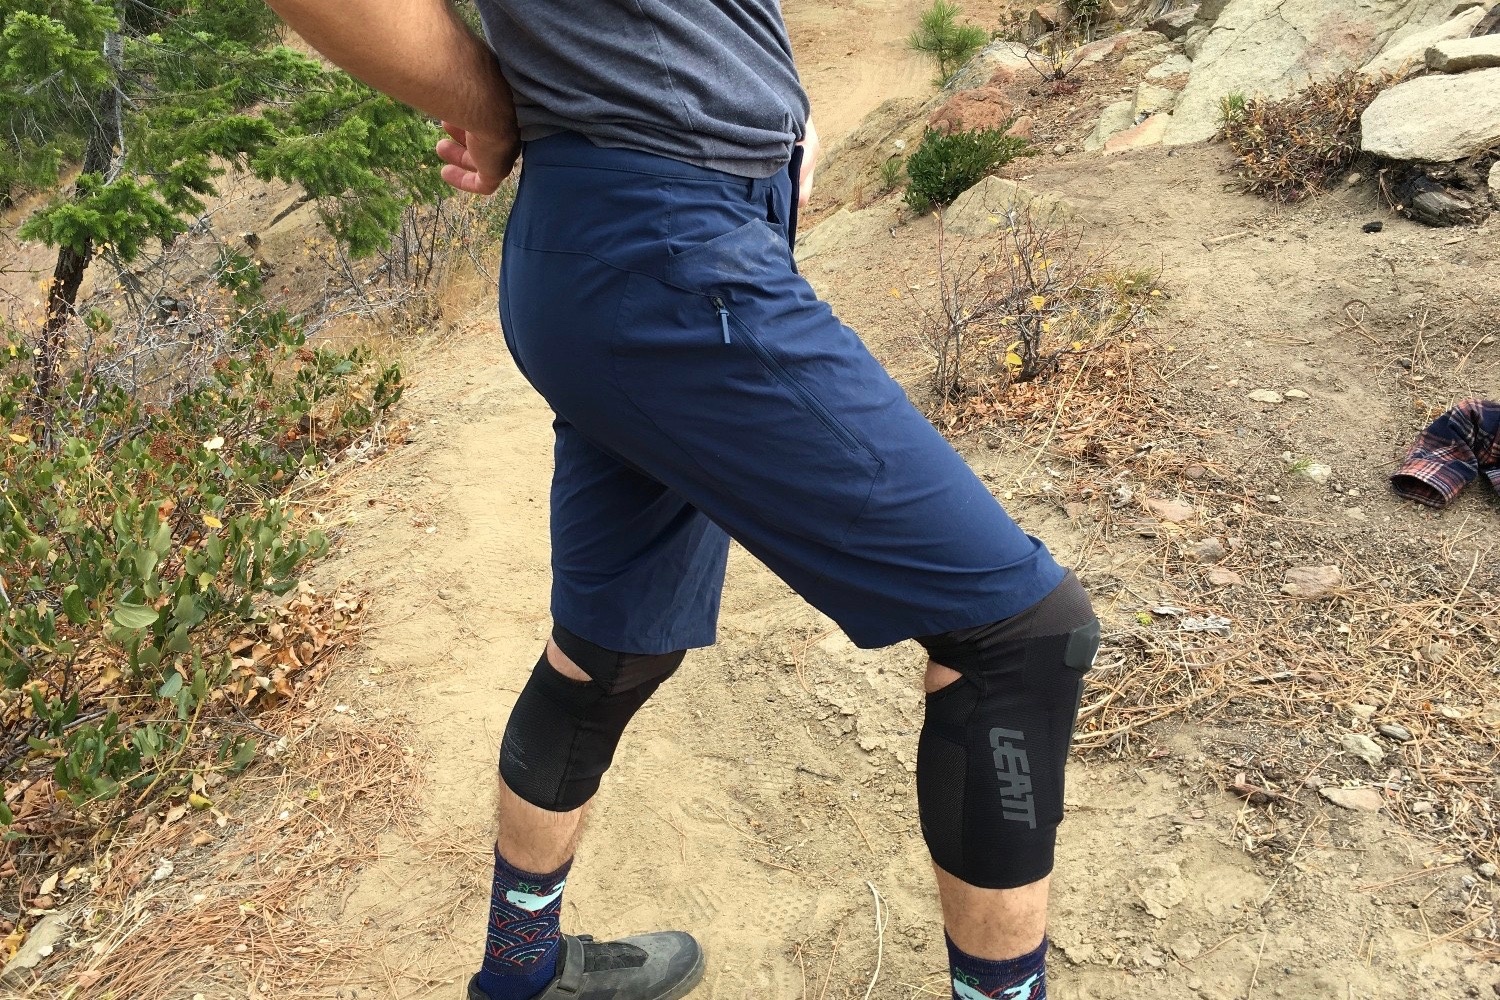 Rapha Trail Shorts Review | Tested by GearLab